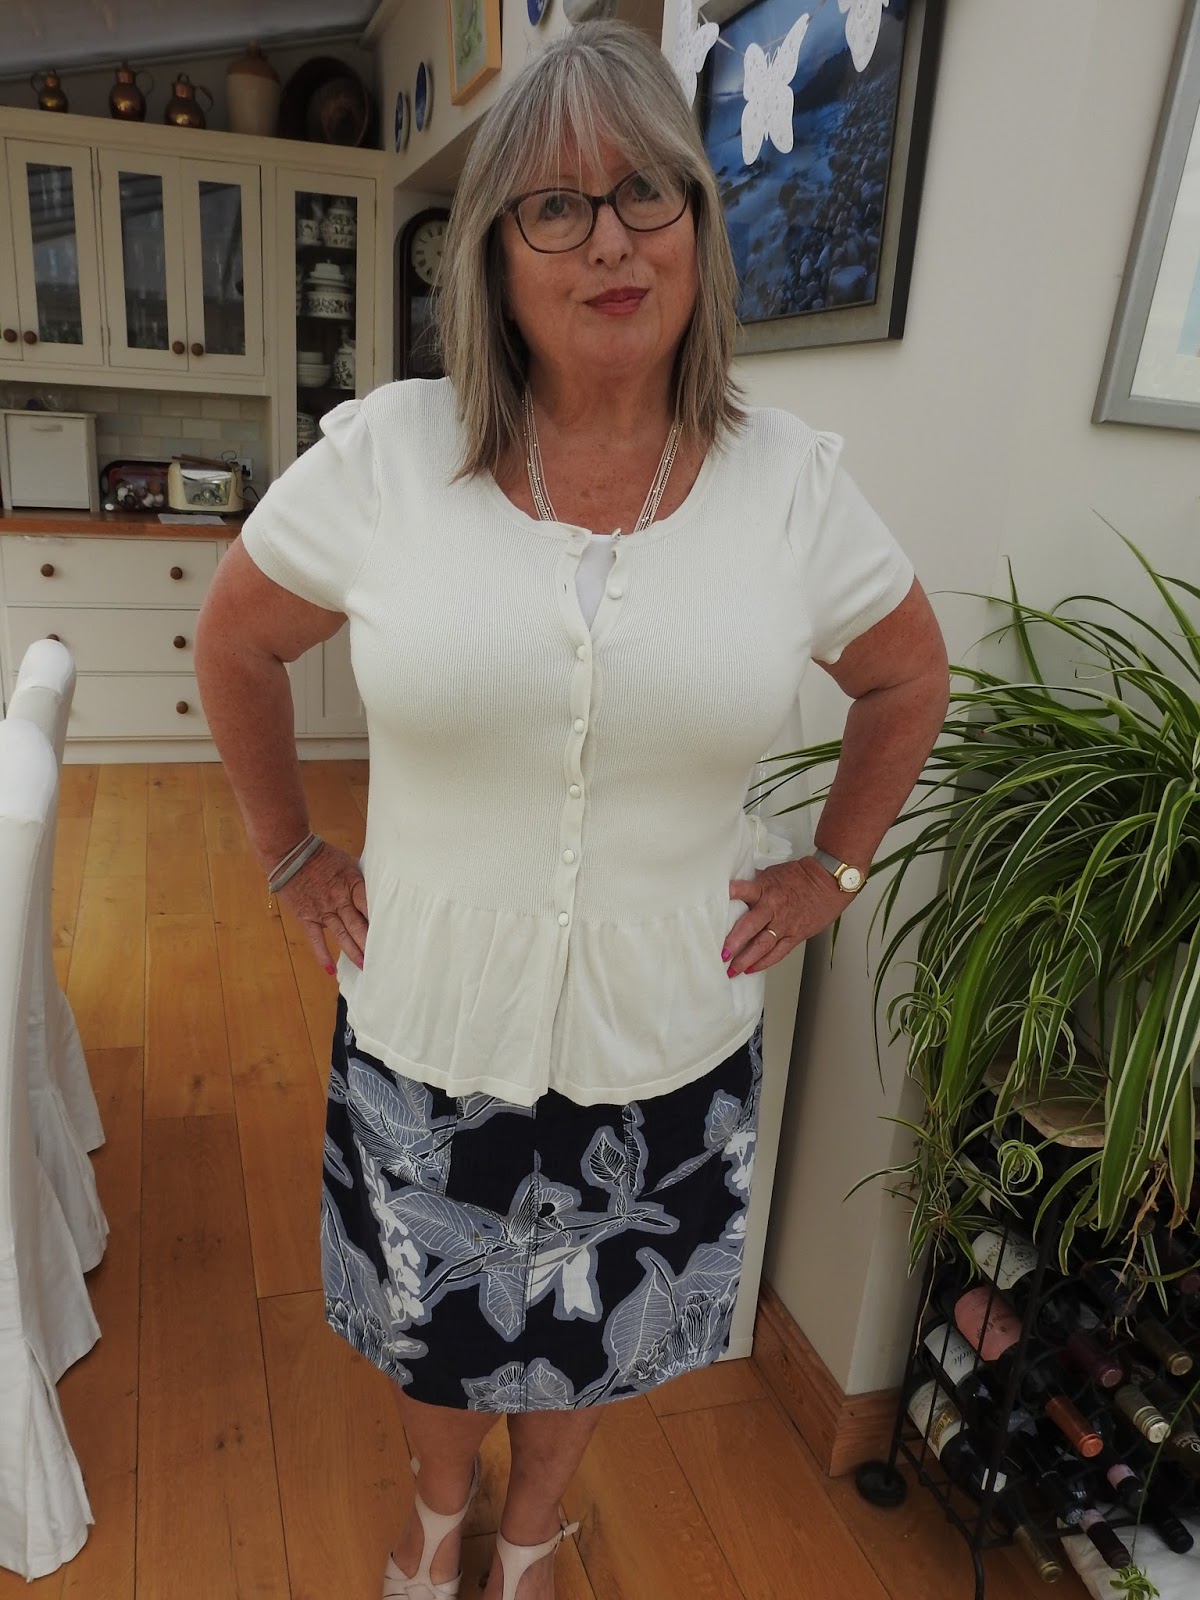 The Pouting Pensioner: Navy Skirt Gets A Try-On Session